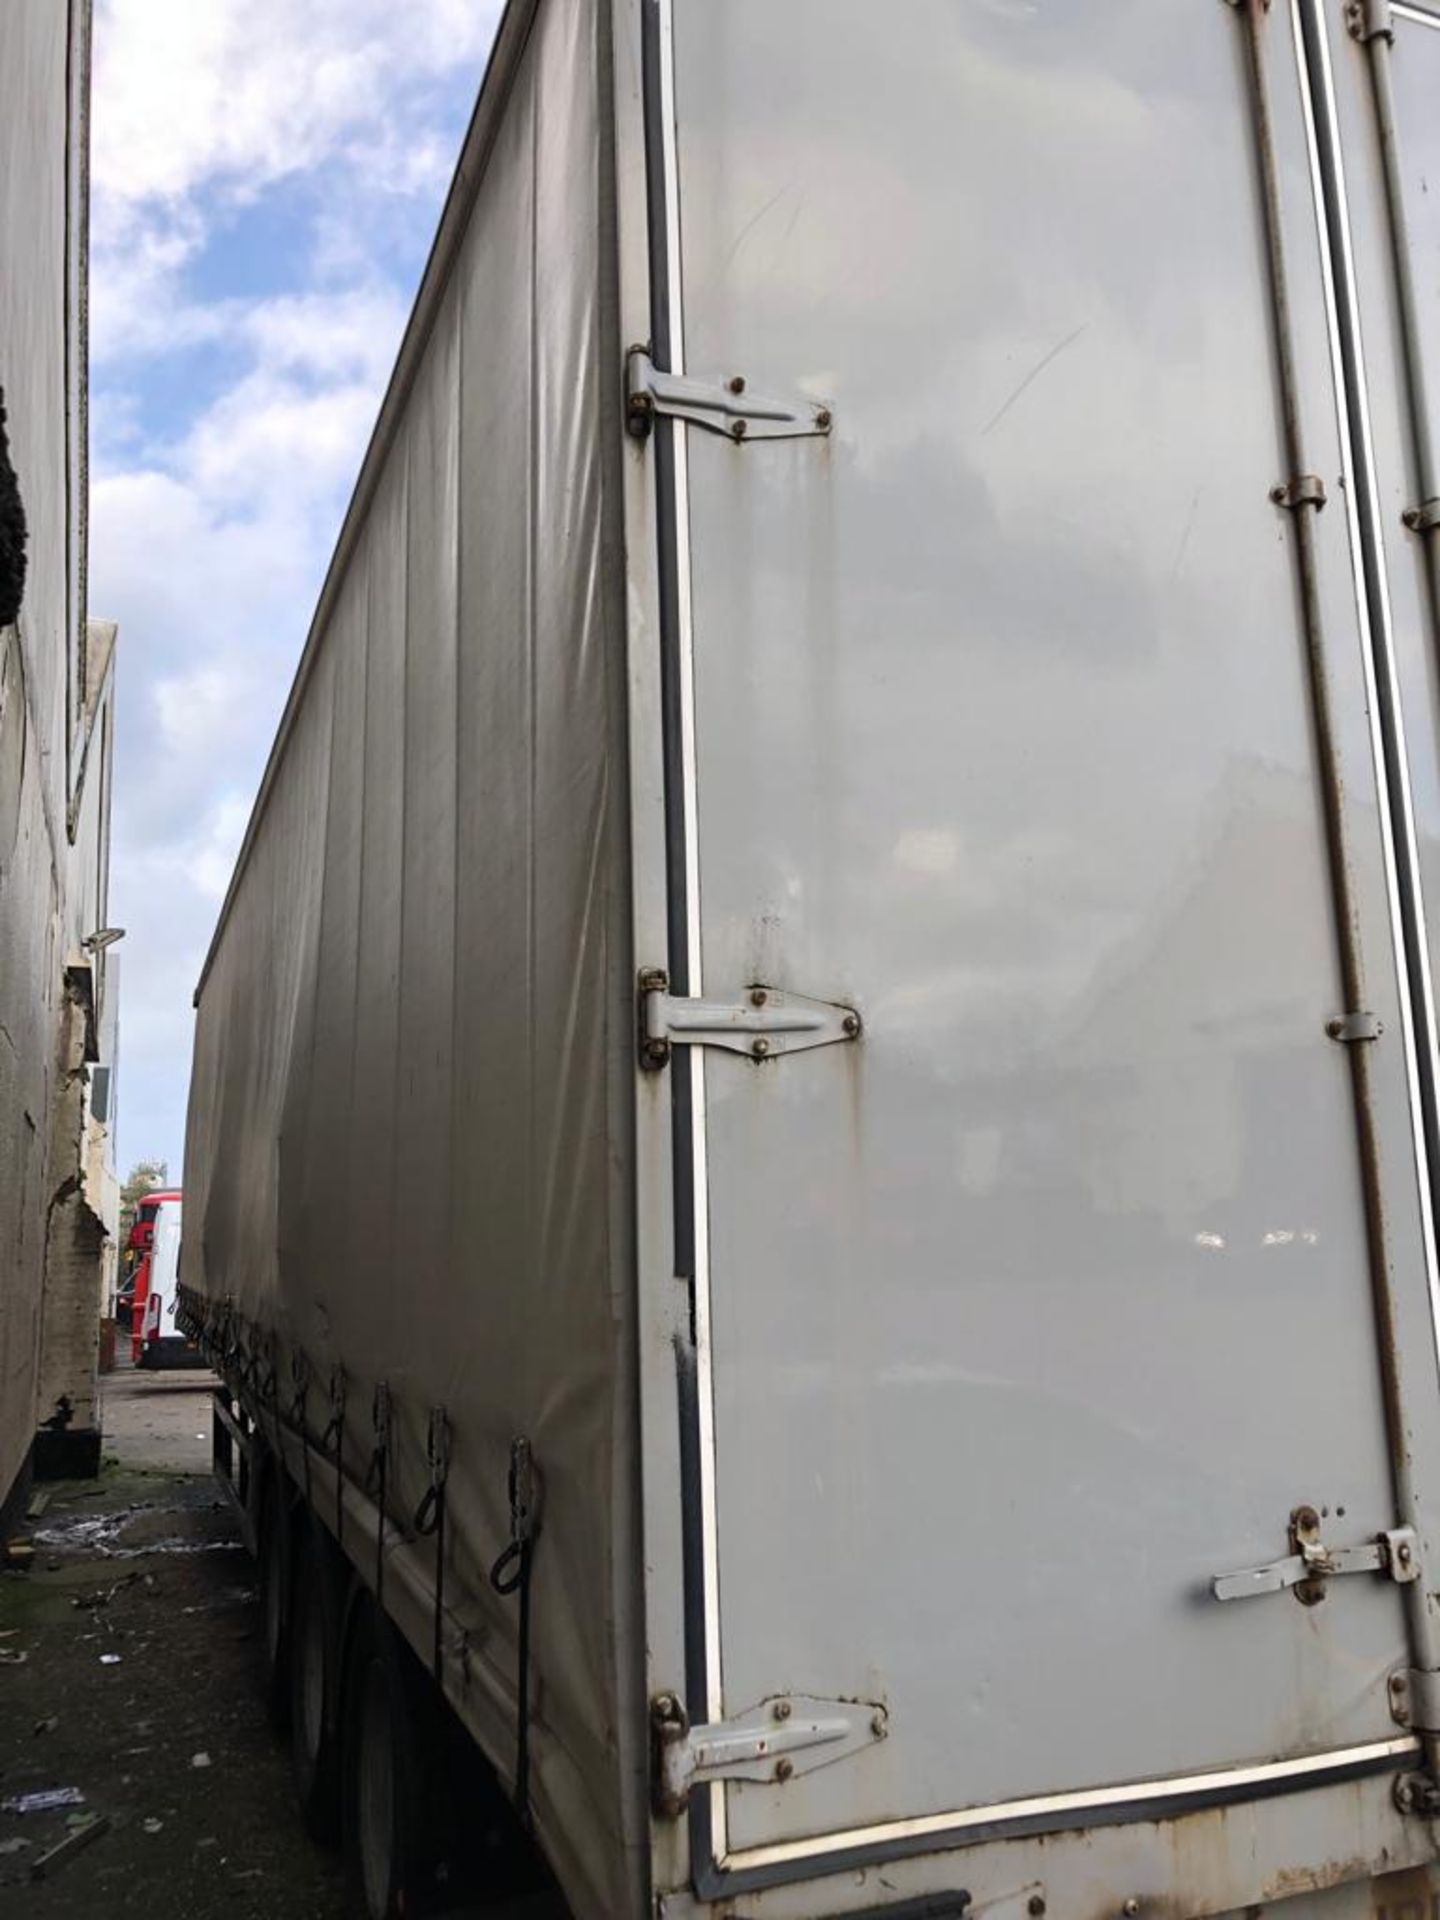 SDC Trailers Tri-Axle Curtain Side Trailer serial number H01100008282 (01/01/05) - Contents included - Image 5 of 20